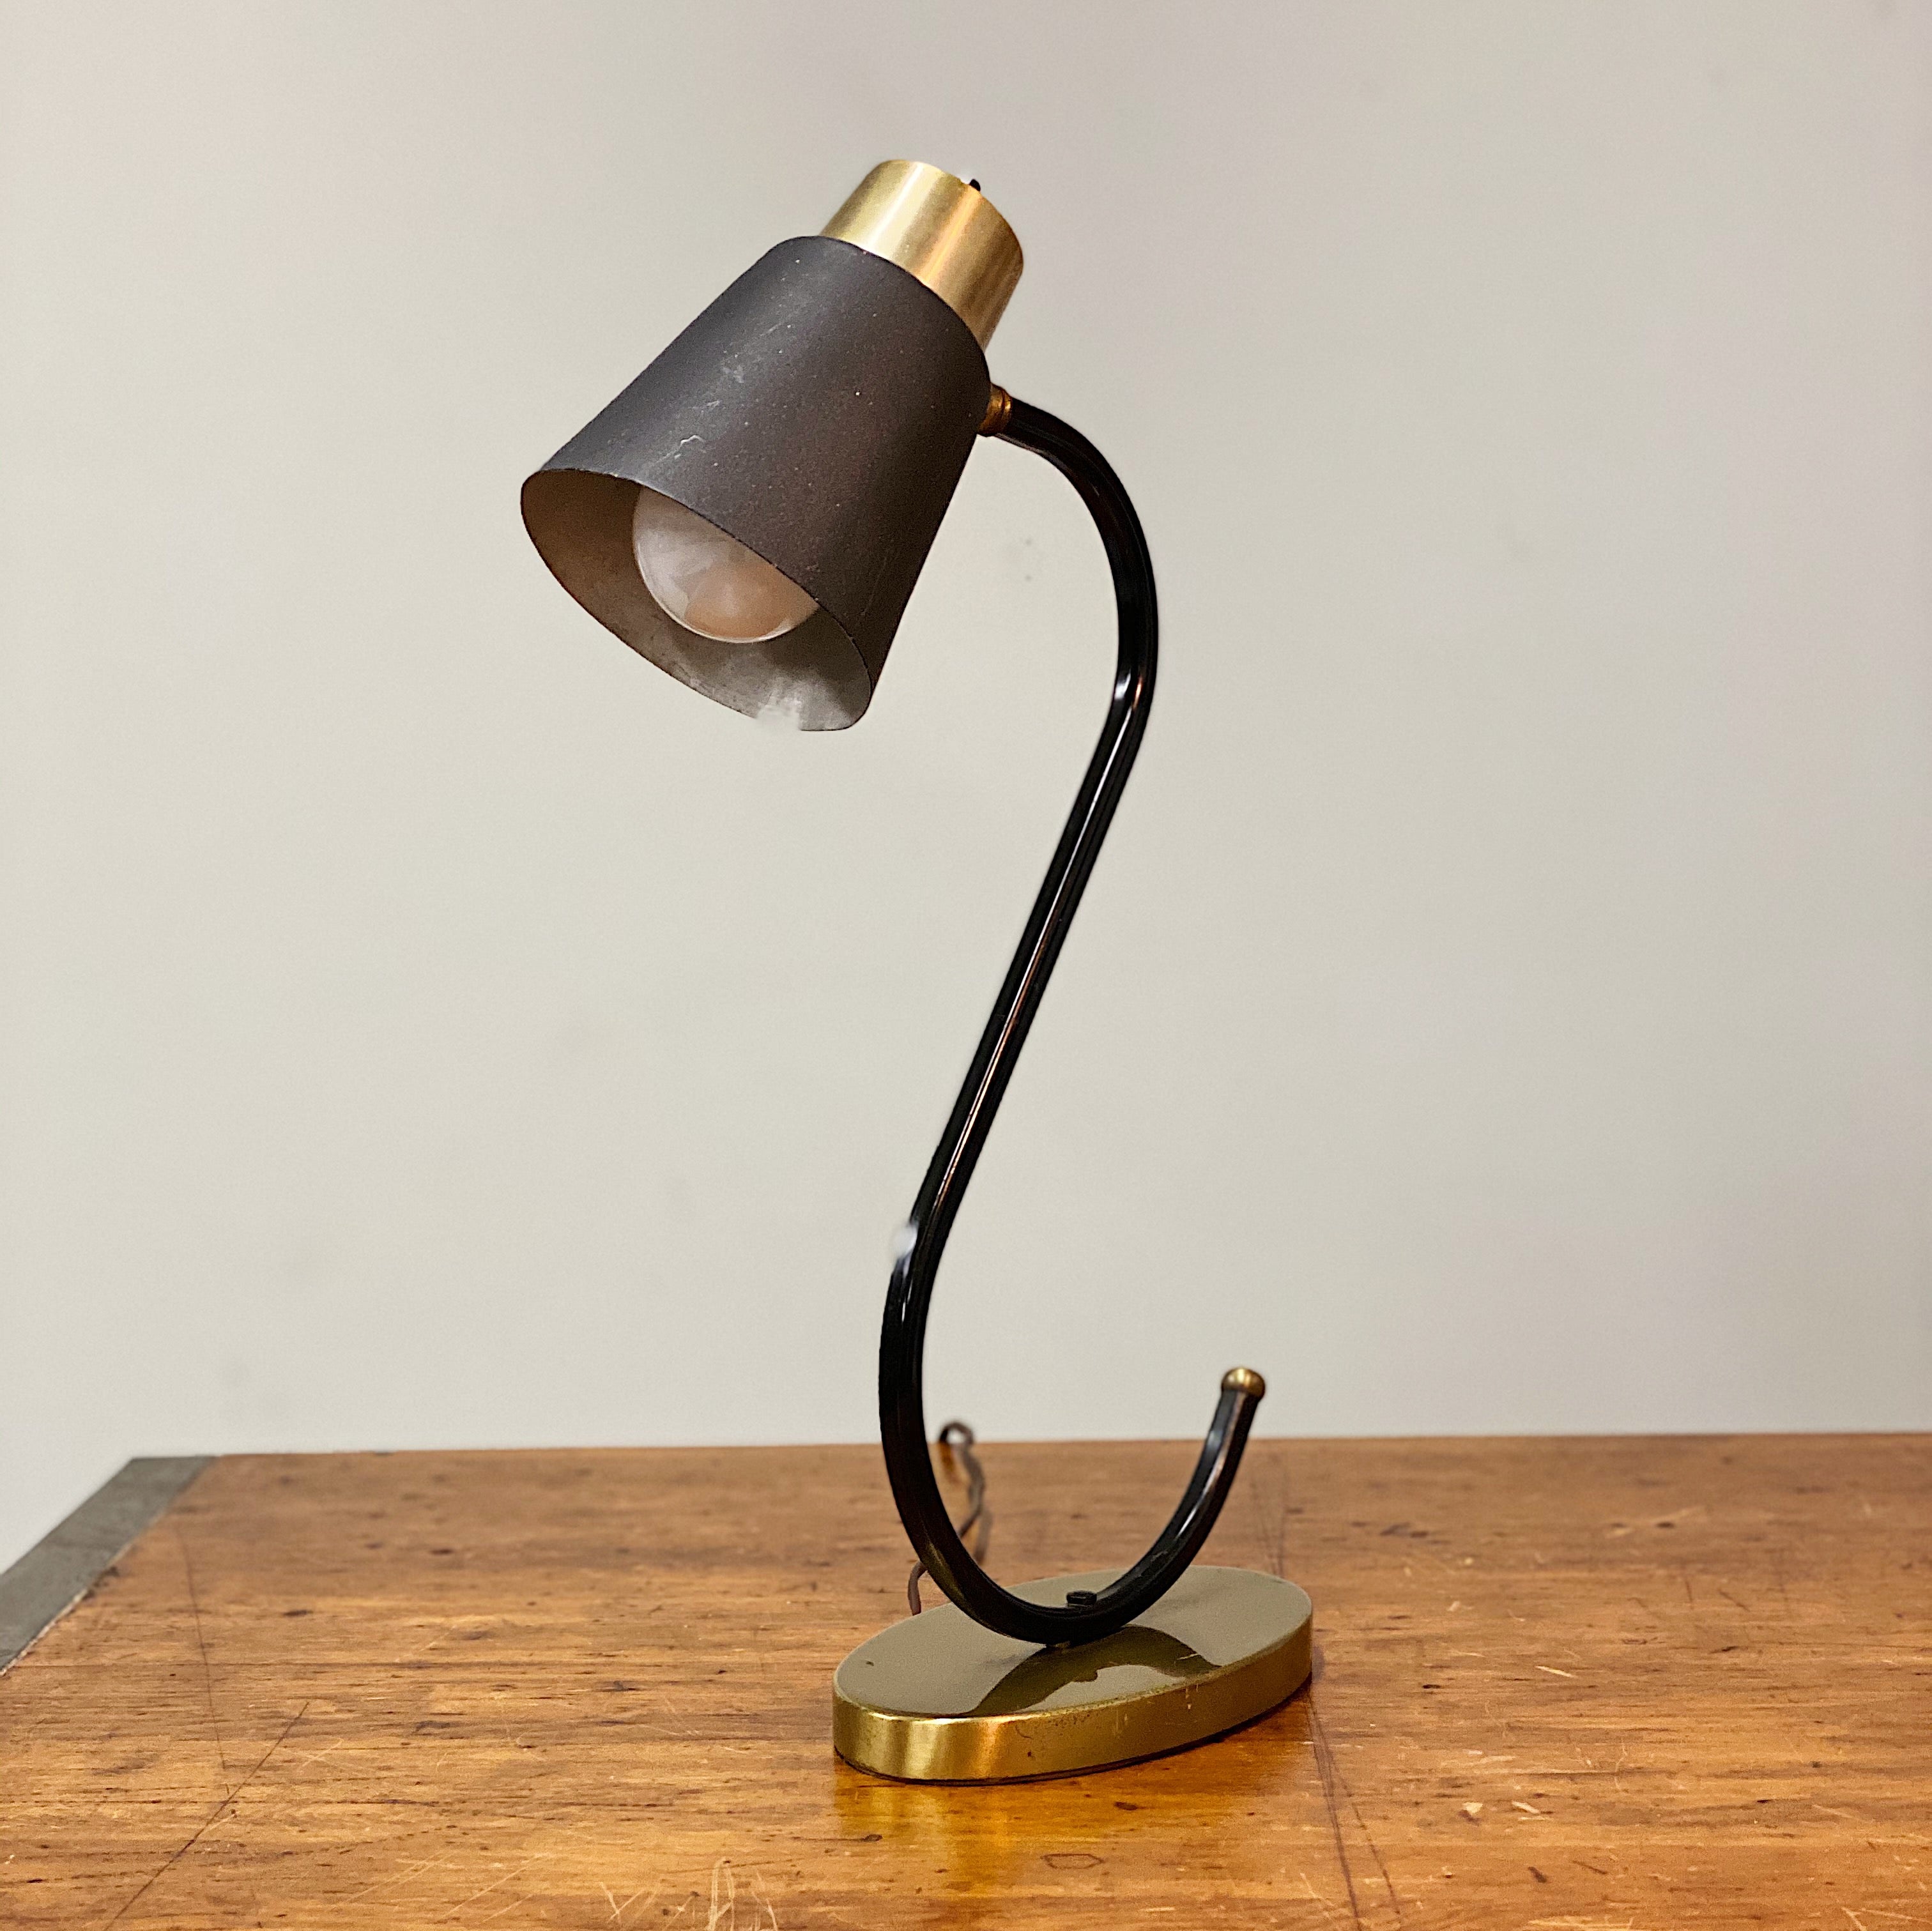 Front view Vintage Midcentury Desk Lamp with Unusual S Shape - Mod Black Table Lamp - Atomic Age Lighting - Rare 1950s Accent Light